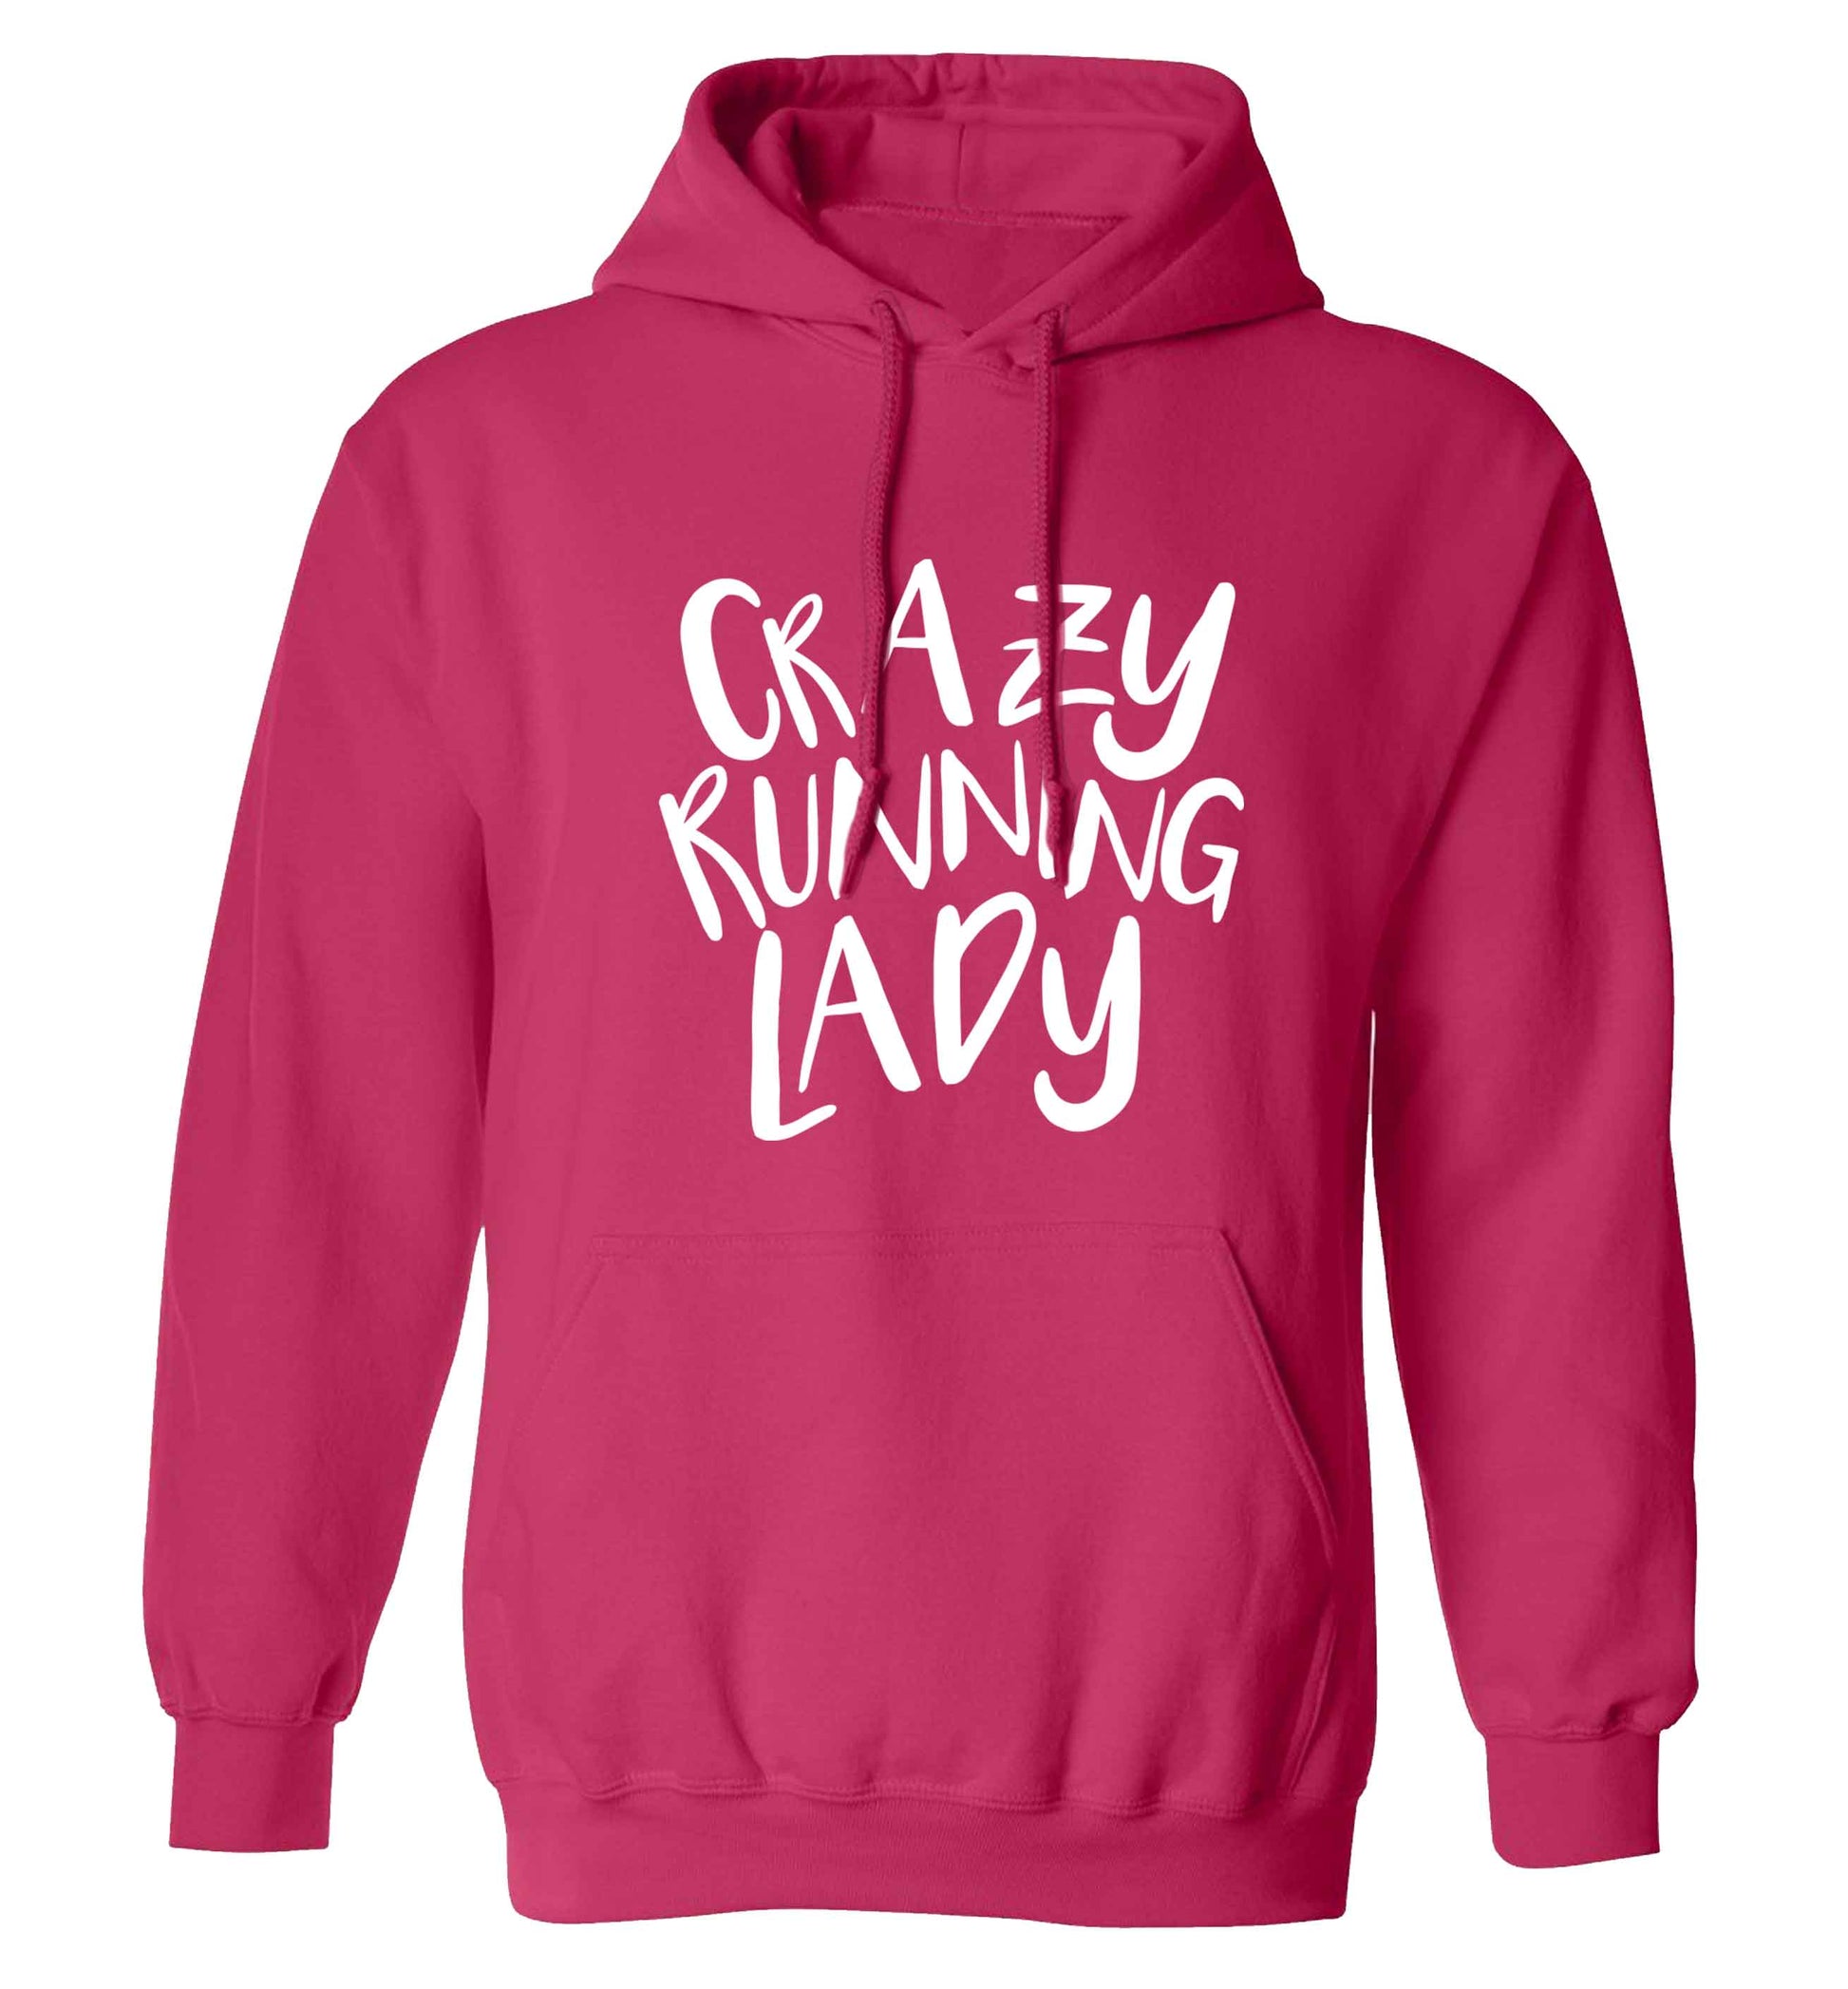 Crazy running lady adults unisex pink hoodie 2XL